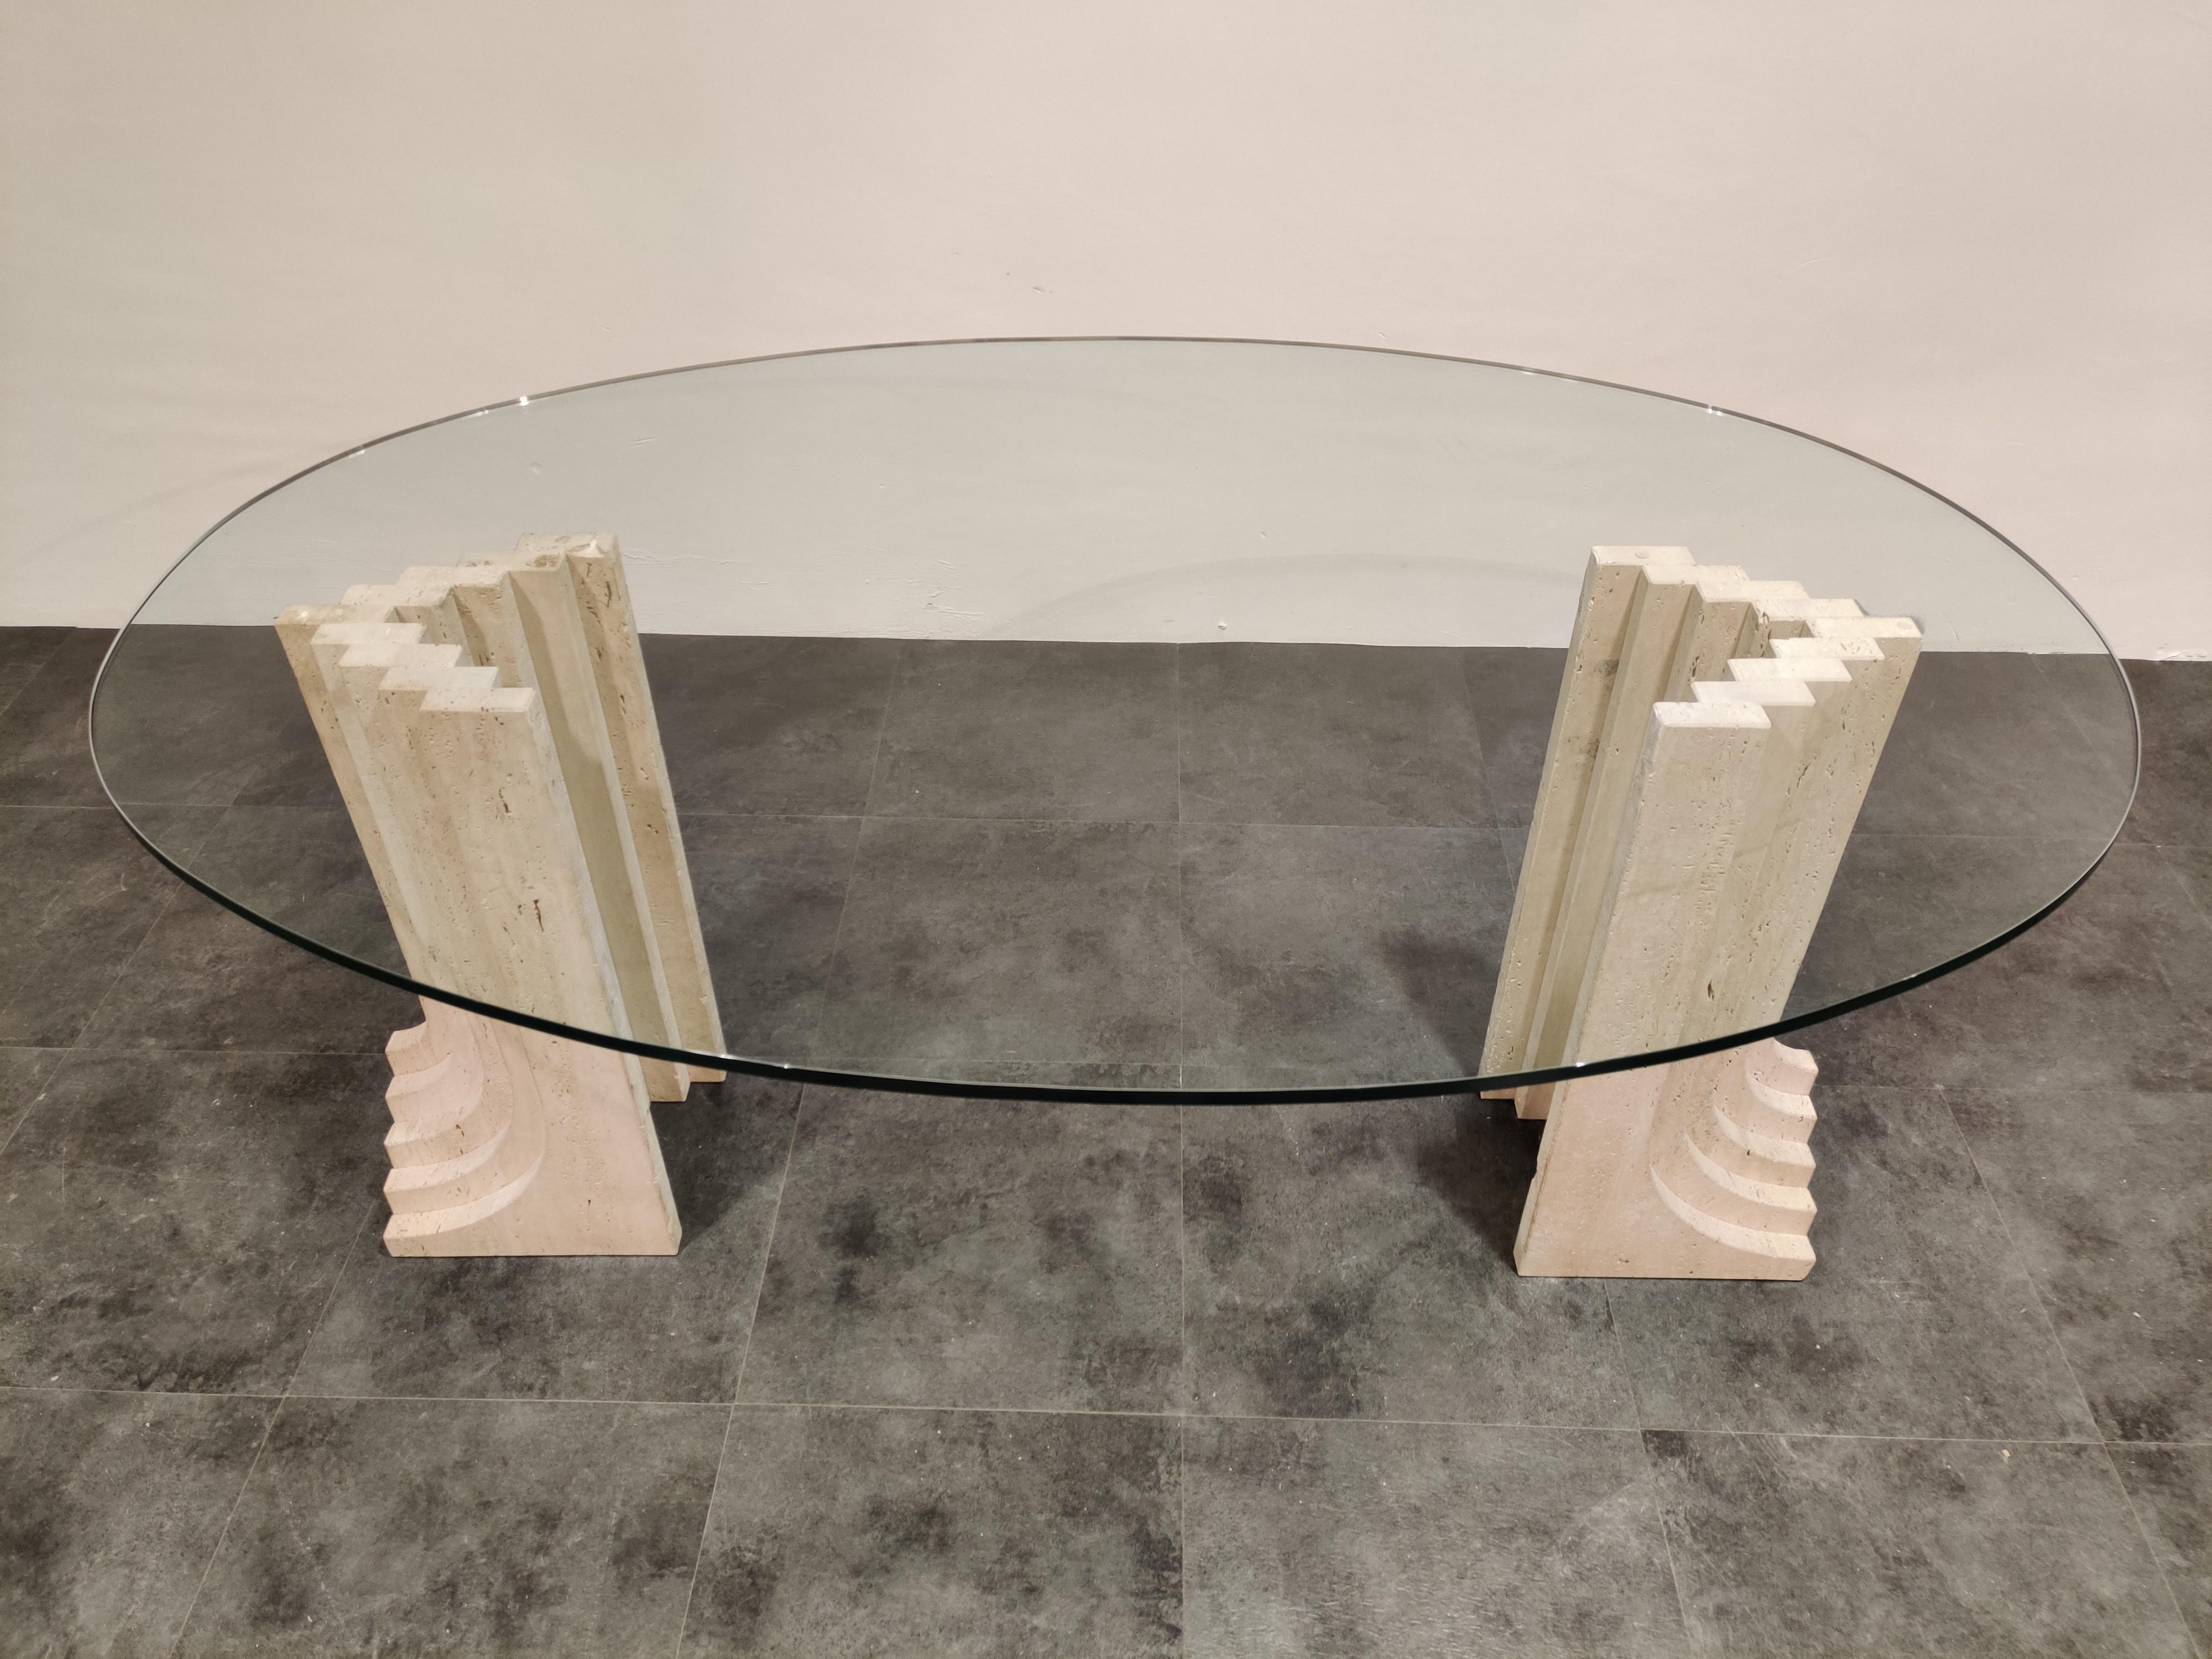 Exquisite travertine dining table in the style of Carlo Scarpa's Samo dining table.

Beautiful architectural piece made of solid travertine with a thick oval glass top.

Timeless design.

The two travertine bases can easily be put in the